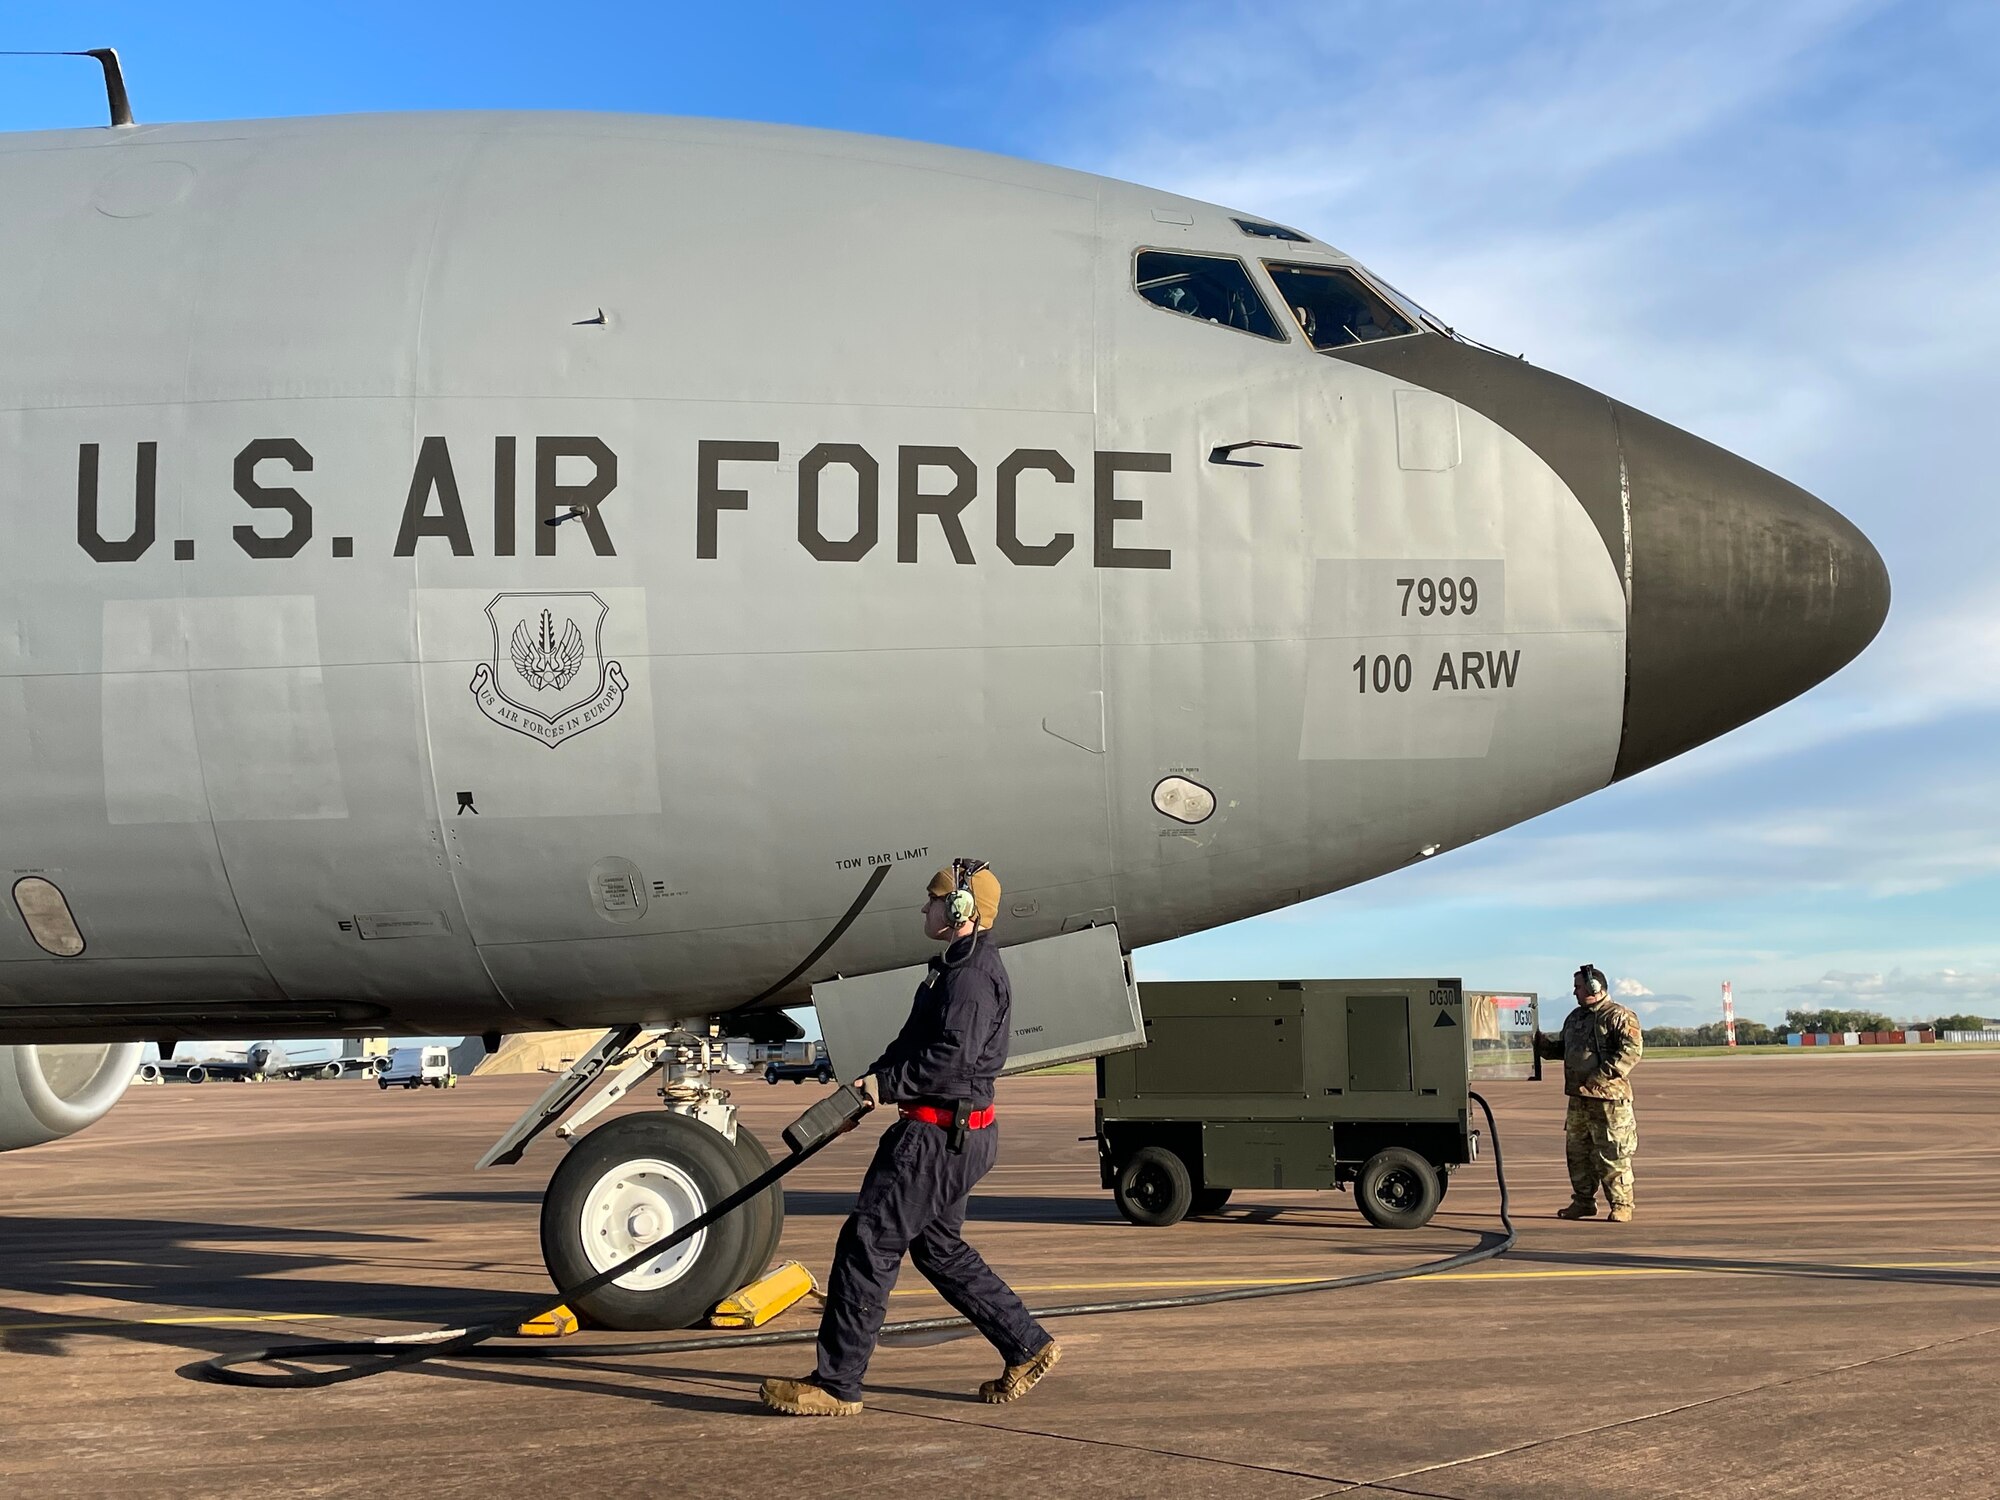 U.S. Air Force Senior Airman Evin Pryga, 100th Aircraft Maintenance Squadron aerospace hydraulics journeyman, removes a power cord from a KC-135 Stratotanker aircraft prior to flight during exercise Castle Forge at Royal Air Force Fairford, England, Nov. 2, 2021. The ability to quickly respond and reassure allies and partners rests upon the U.S. Air Force’s forward and ready presence in Europe. In addition to F-15 Eagle aircraft operations in the Black Sea Region, Castle Forge encompasses the USAFE-wide Agile Combat Employment capstone event. Castle Forge’s components will better enable forces to quickly disperse and continue to deliver air power from locations with varying levels of capacity and support, ensuring Airmen are always ready to respond to potential threats. (U.S. Air Force photo by Senior Airman Joseph Barron)